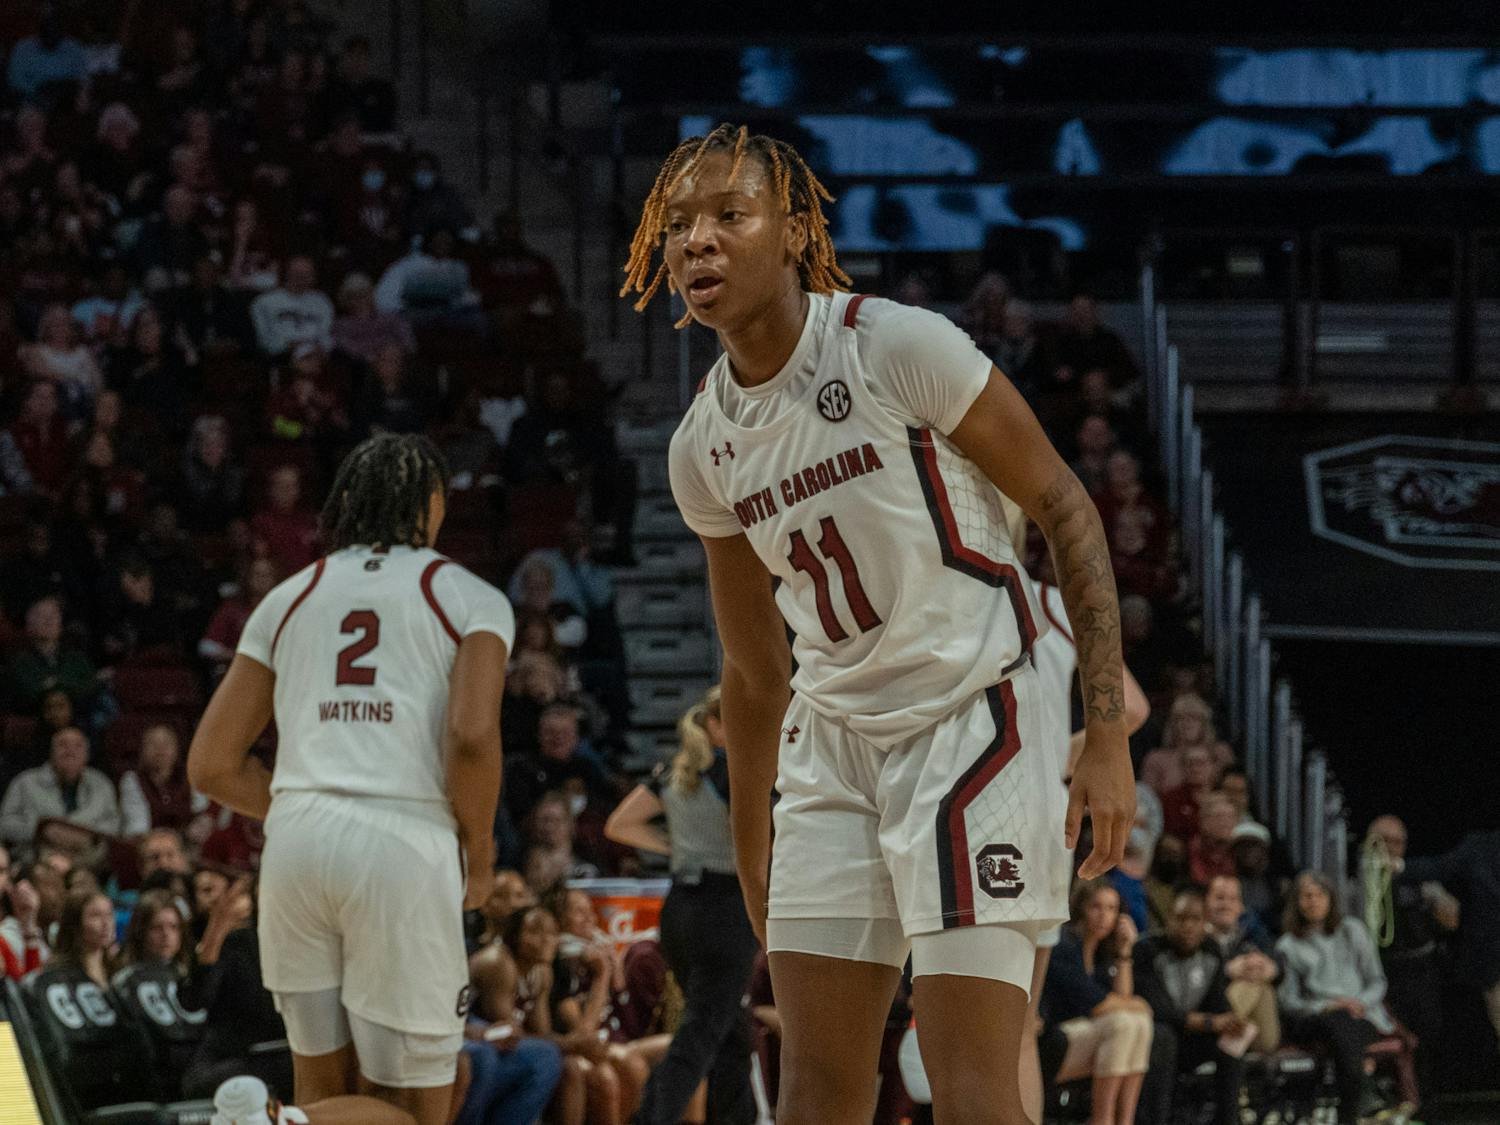 Freshman guard Talaysia Cooper waits behind the free throw line during the third quarter of South Carolina’s game against Texas A&amp;M on Dec. 29, 2022. Cooper was a standout player during the game, scoring 15 points.